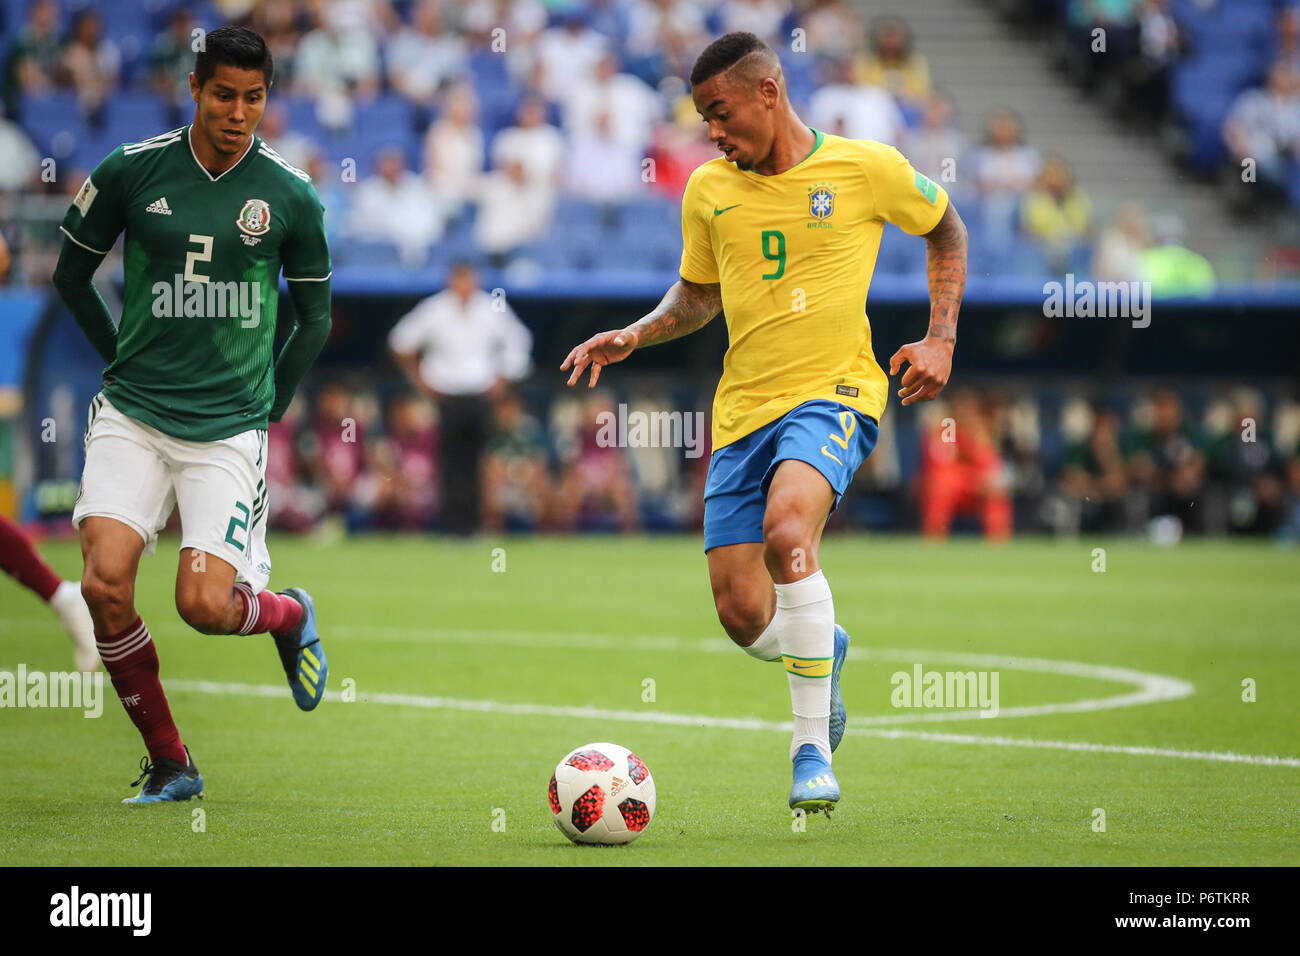 Samara, Russia. 02nd July, 2018. Hugo AYALA and GABRIEL JESUS during the game between Brazil and Mexico valid for the octaves of finals of the 2018 World Cup held in Arena Samara, Russia. Brazil won 2-0. Credit: Thiago Bernardes/Pacific Press/Alamy Live News Stock Photo